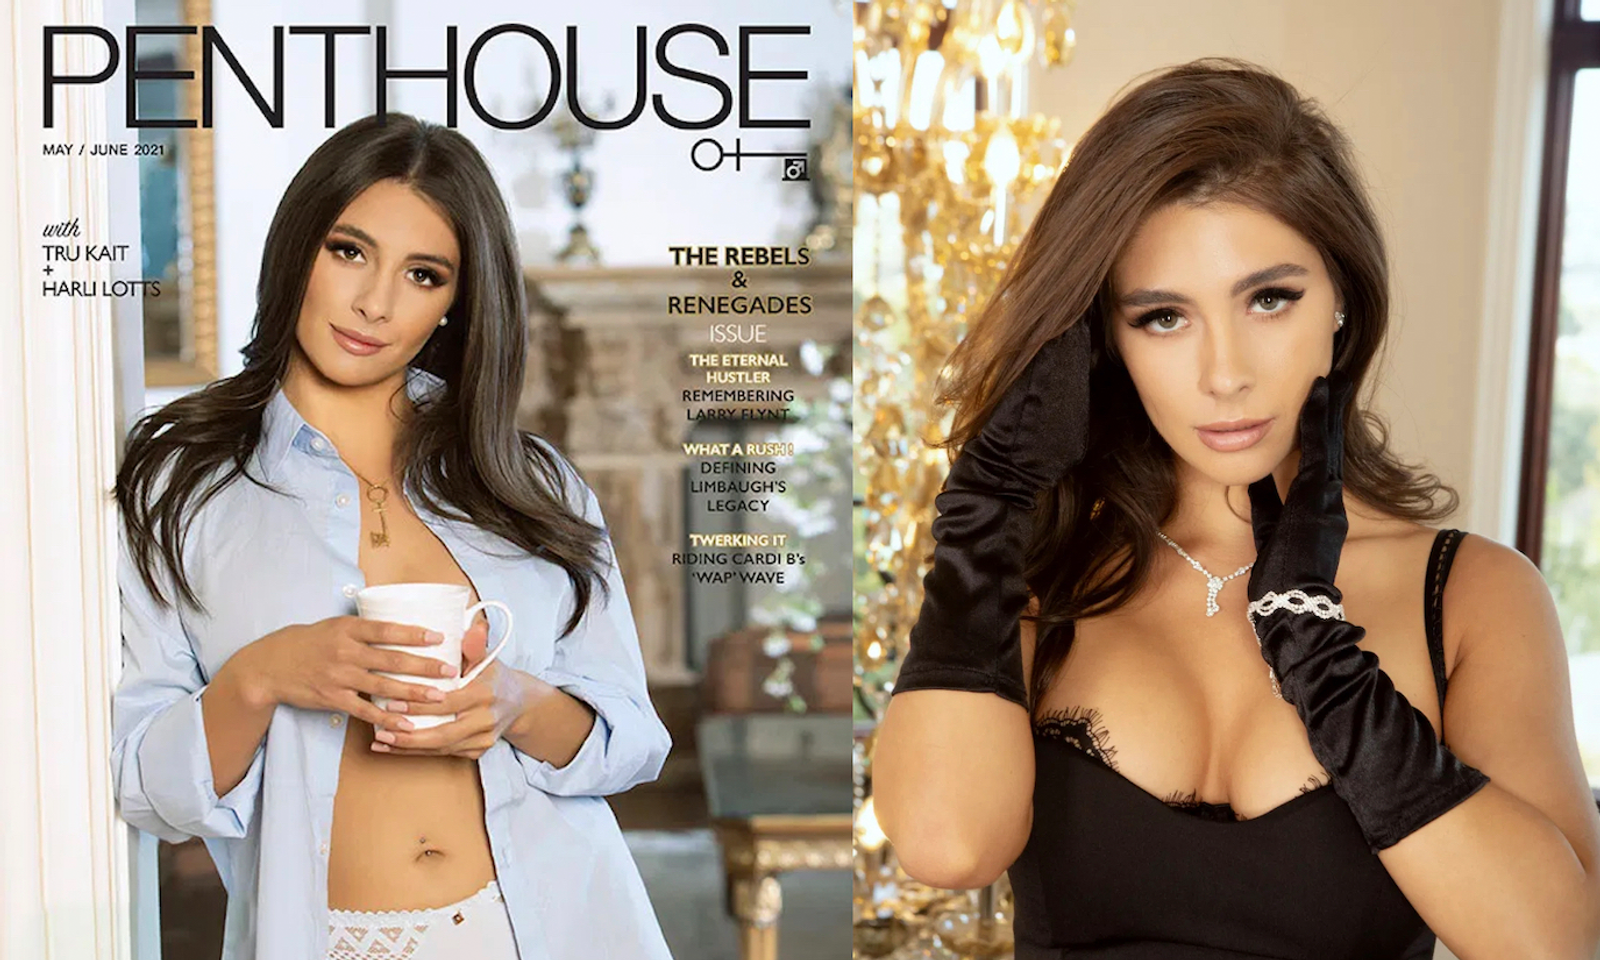 Tru Kait Named 'Penthouse' Pet of the Month